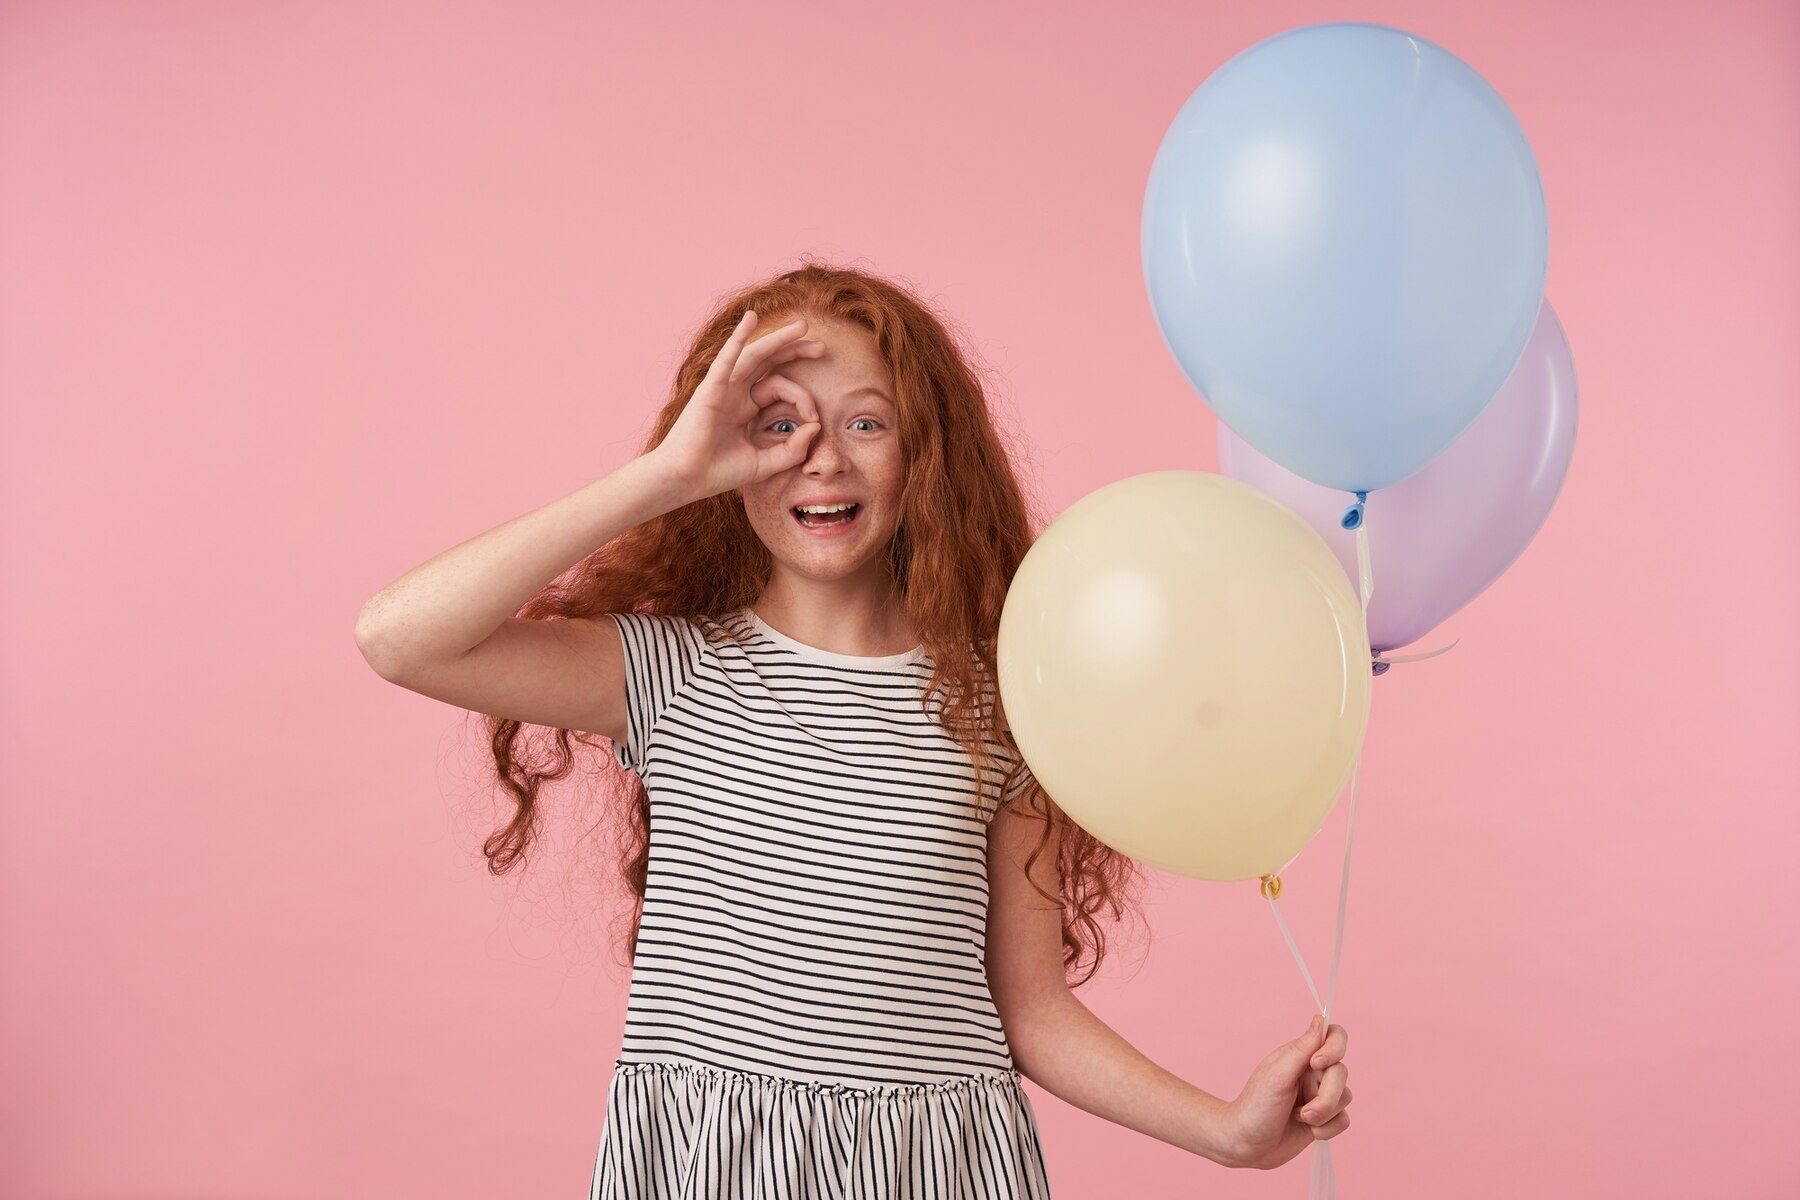 happy-cute-redhead-curly-female-kid-raising-hand-with-ok-gesture-her-eye-posing-pink-background-with-air-ballons-looking-camera-joyfully-smiling-widely_295783-6973.jpeg